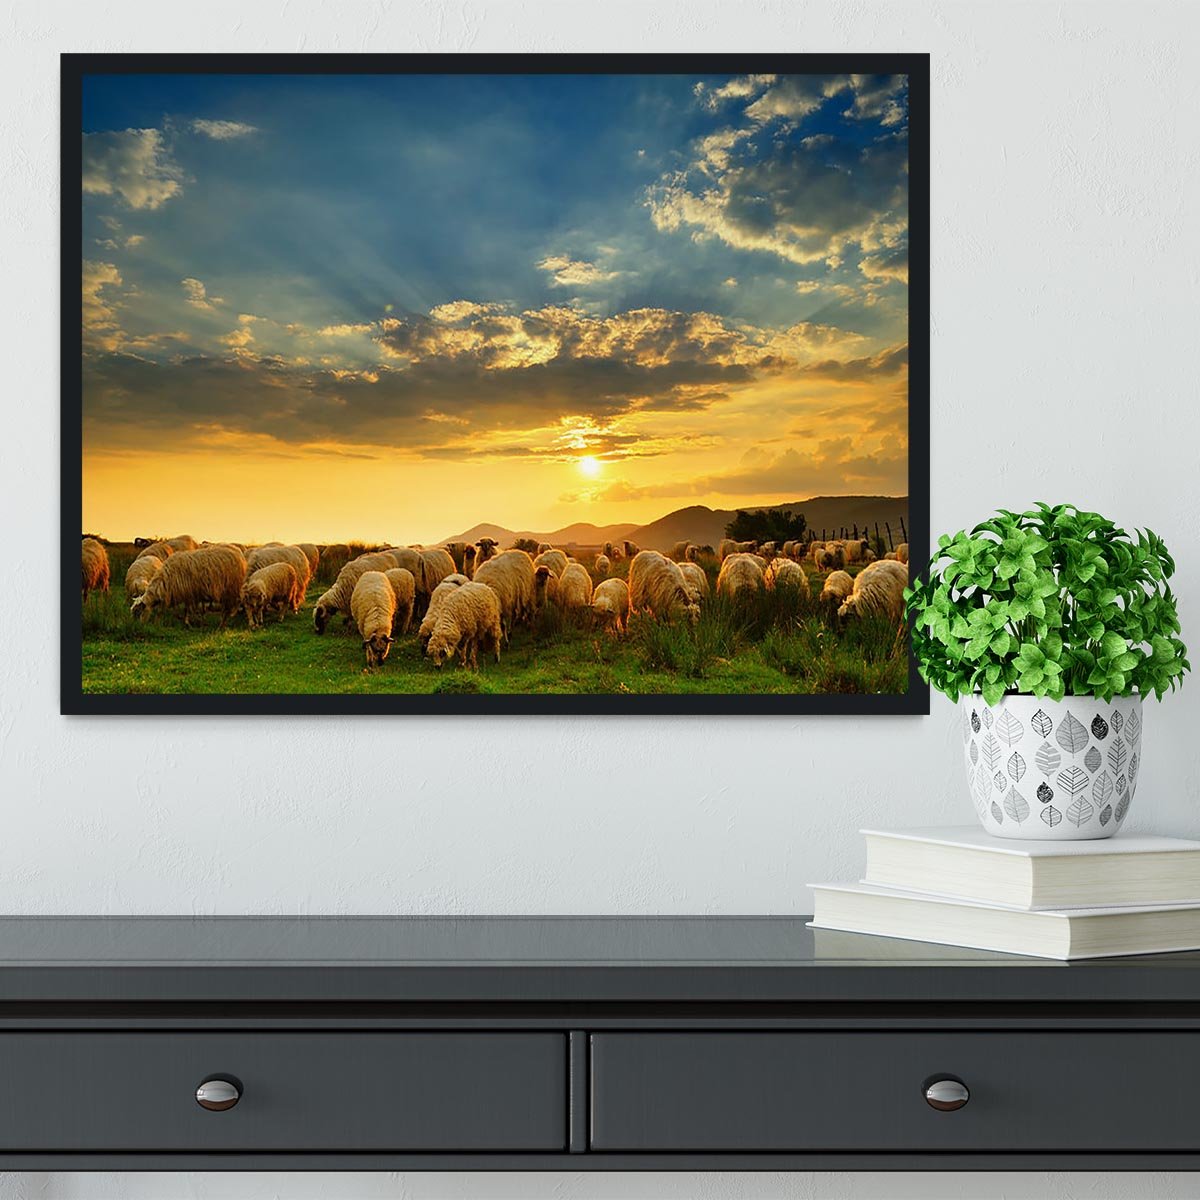 Flock of sheep grazing in a hill at sunset Framed Print - Canvas Art Rocks - 2